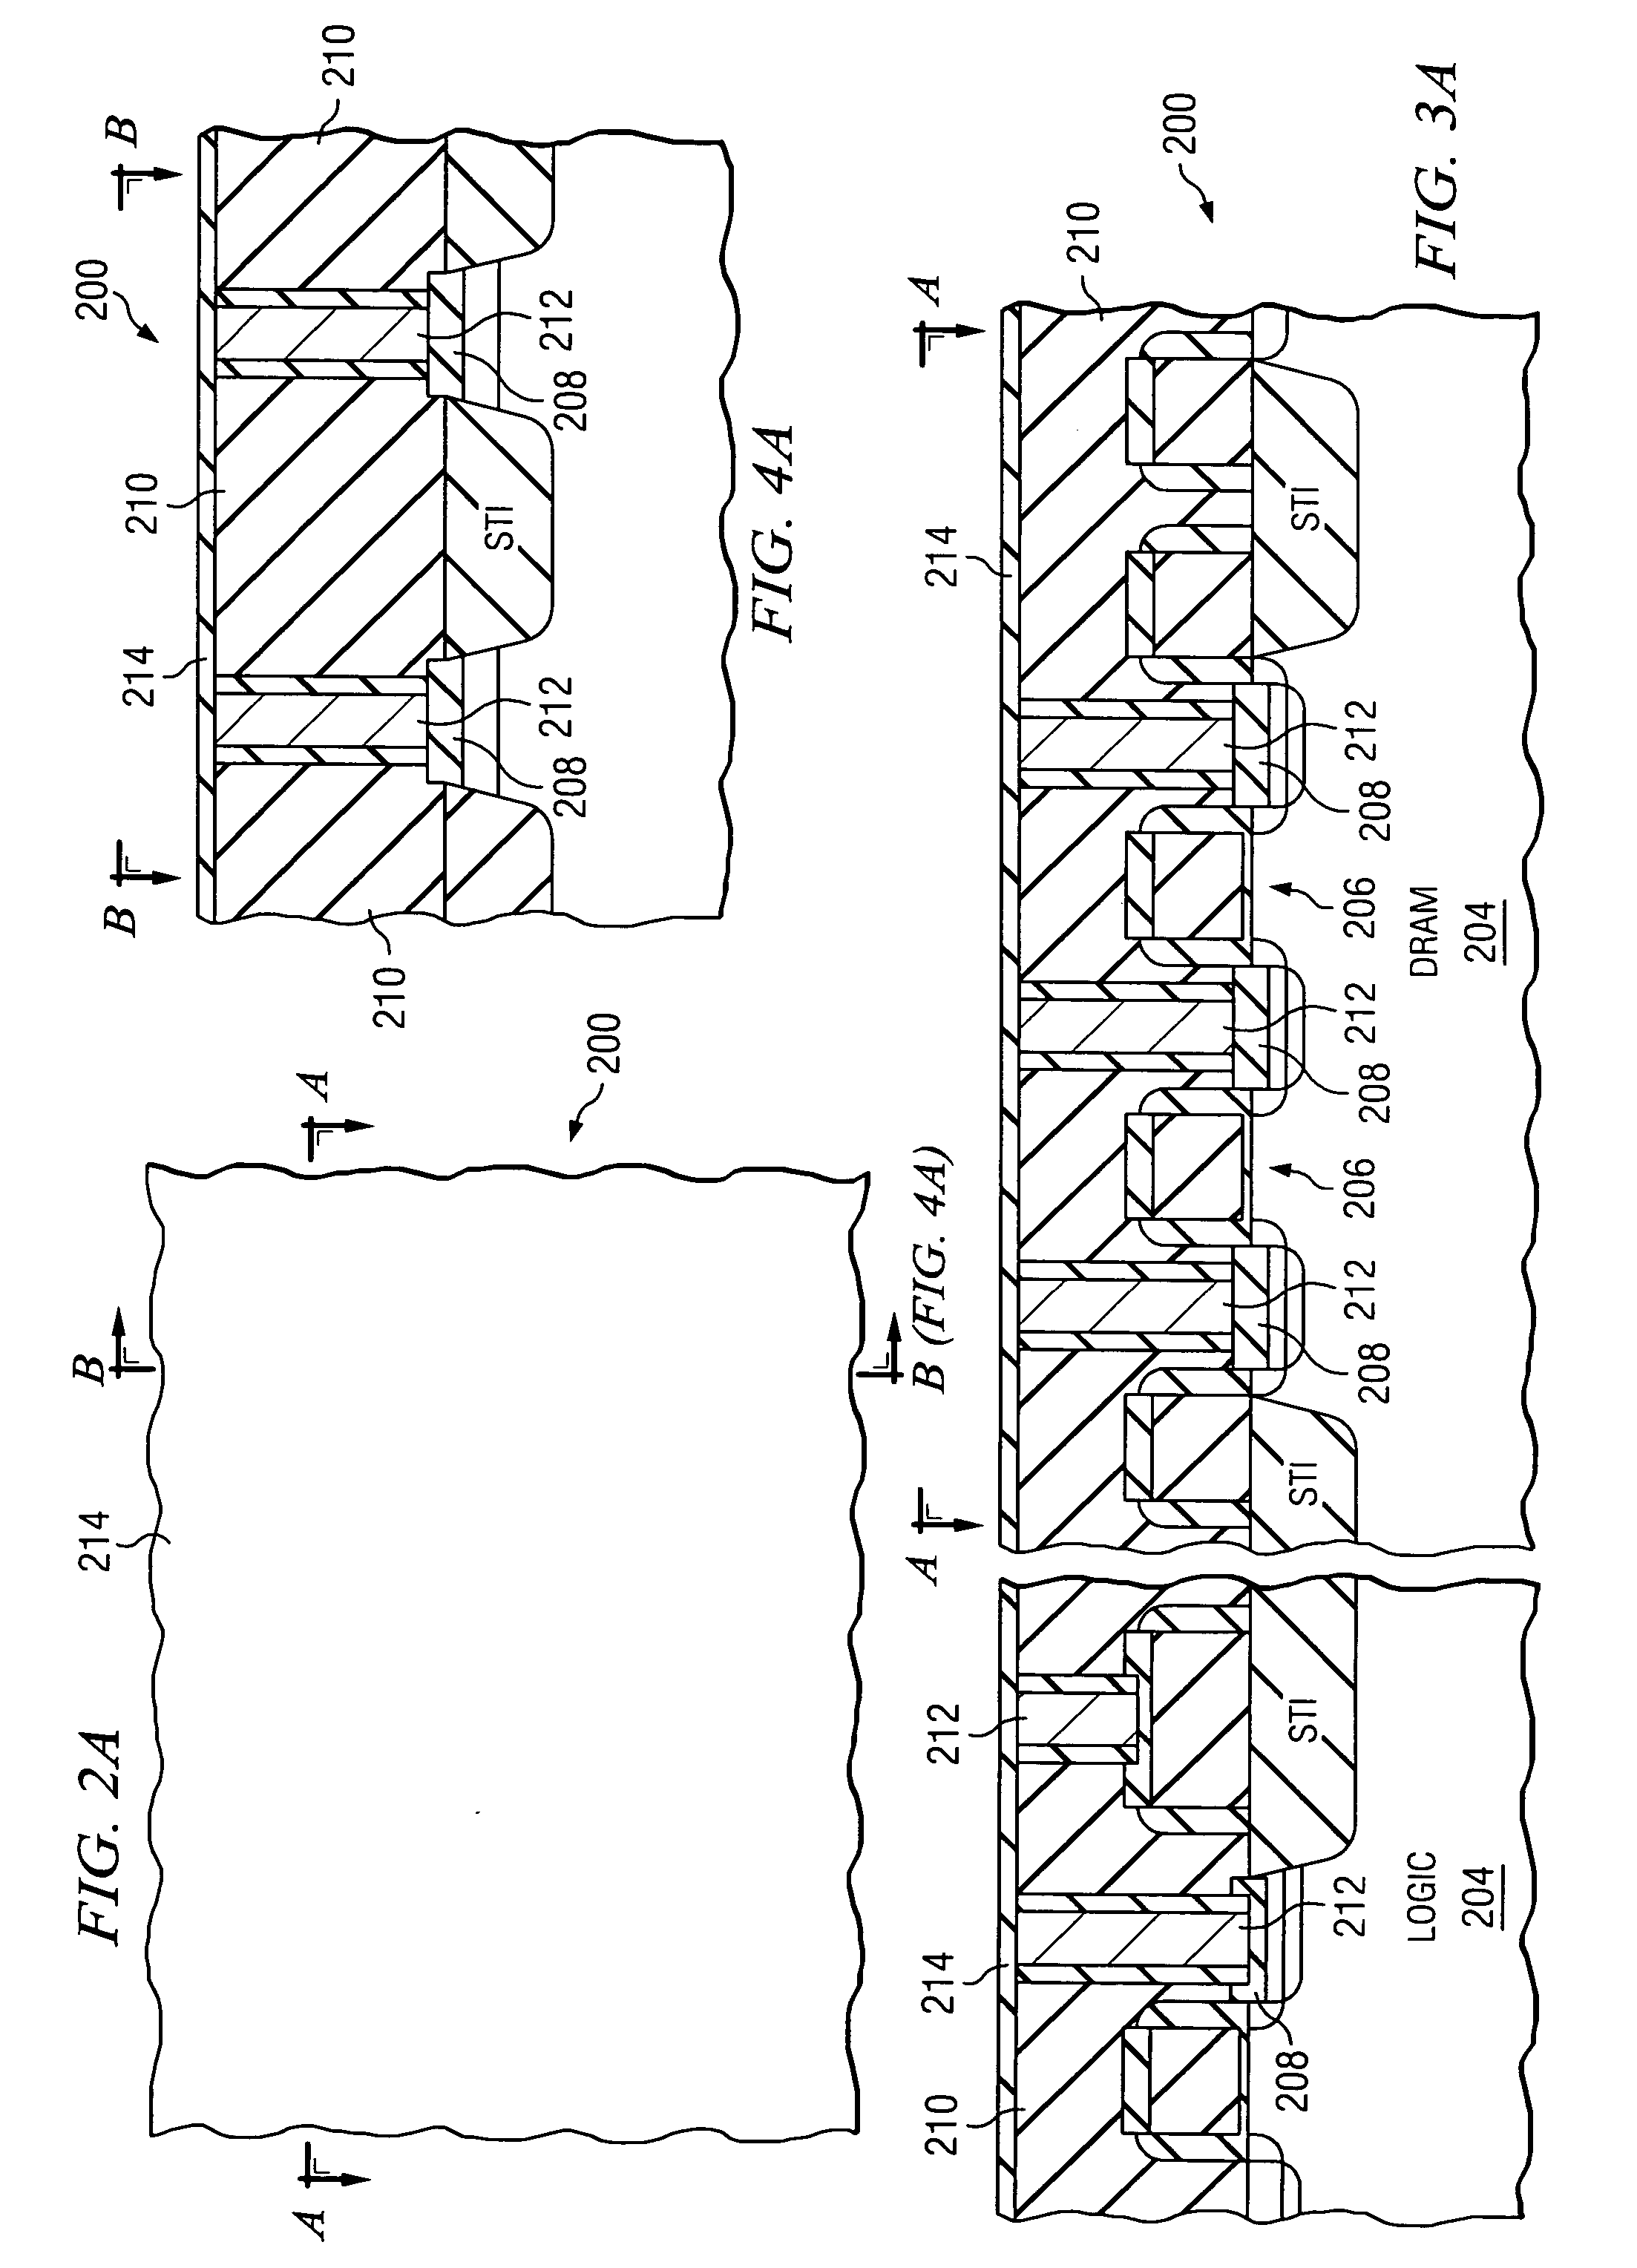 MIM capacitor structure and method of manufacture